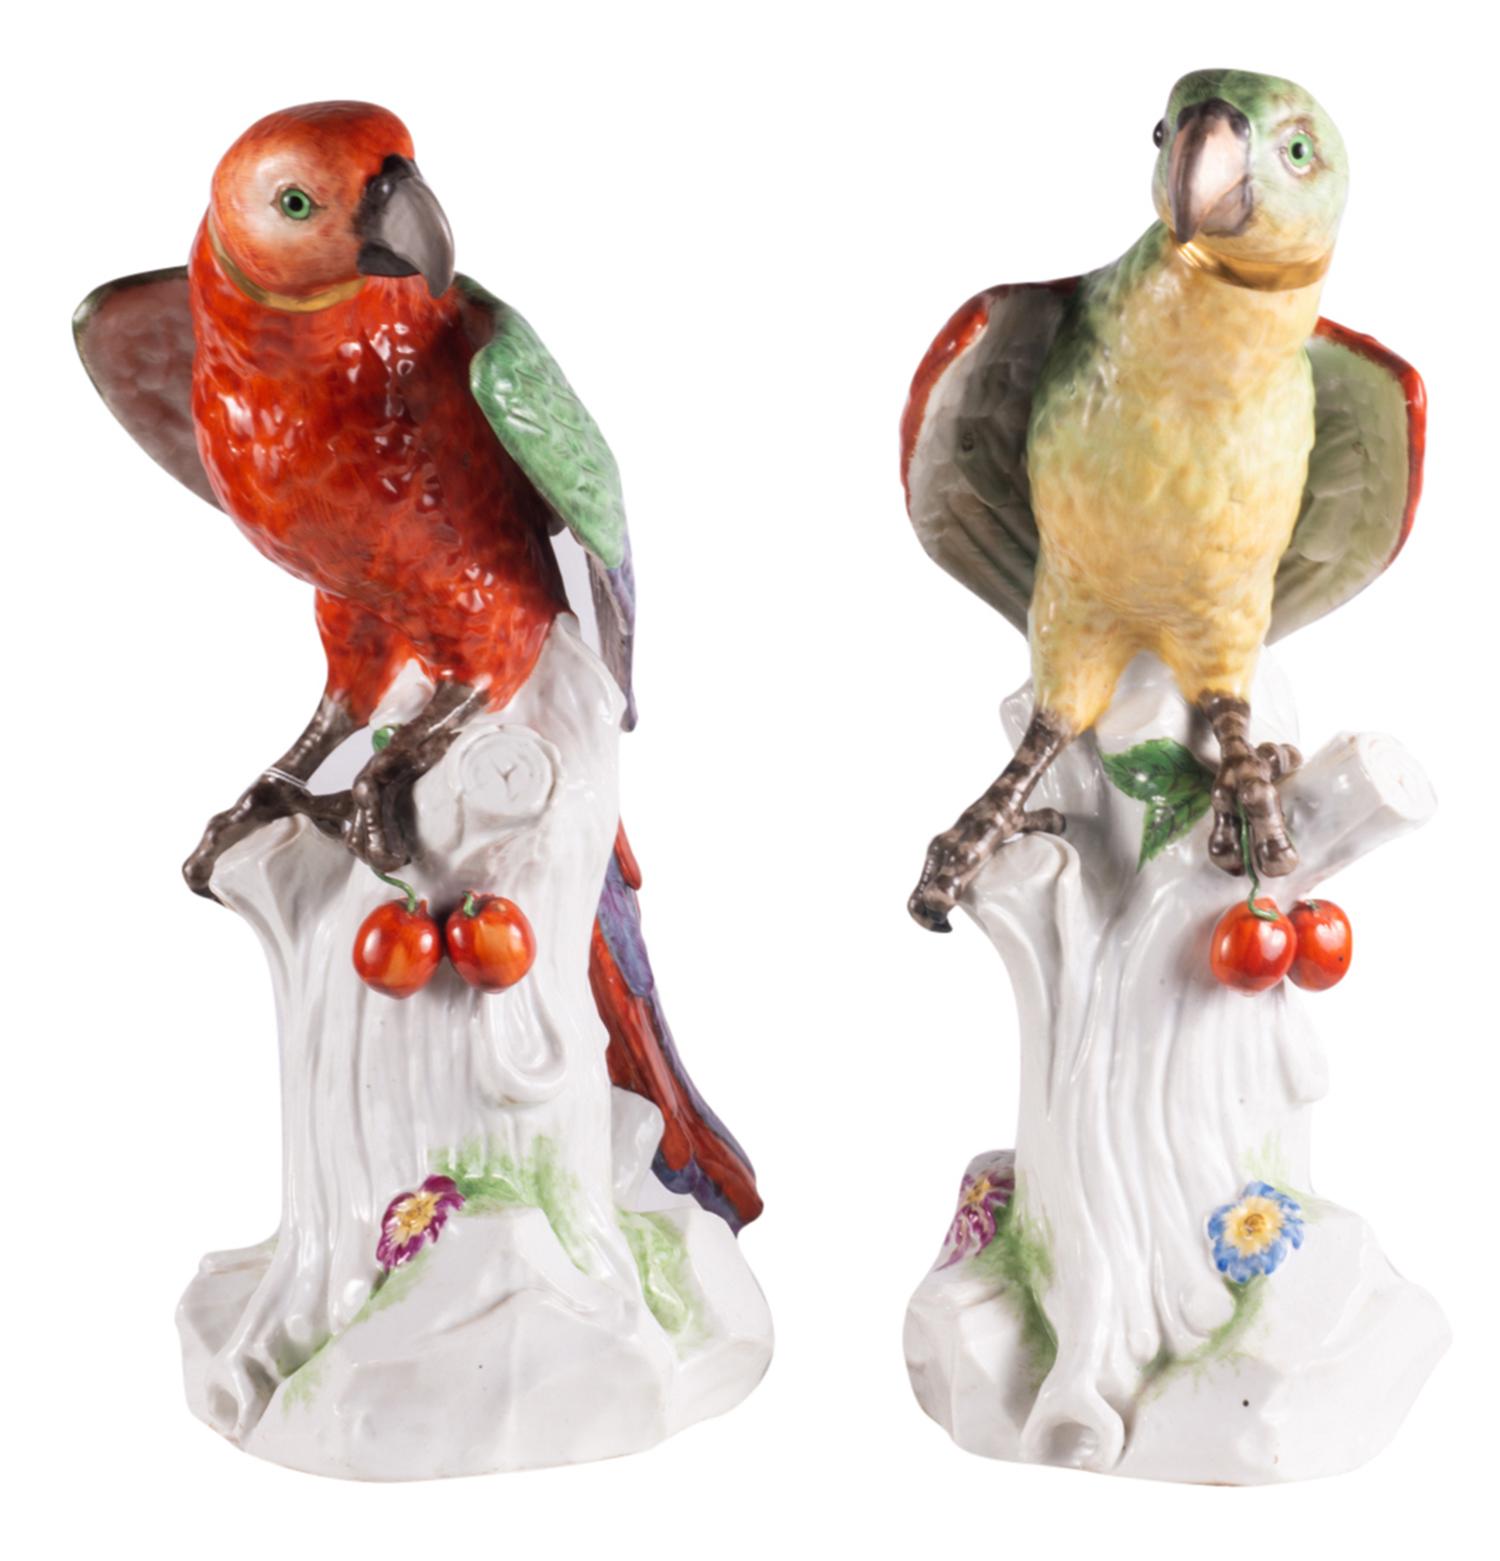 A very impressive pair of 19th century Dresden porcelain parrots, each in wonderful bold colors, set on tree stumps and holding cherries.
       